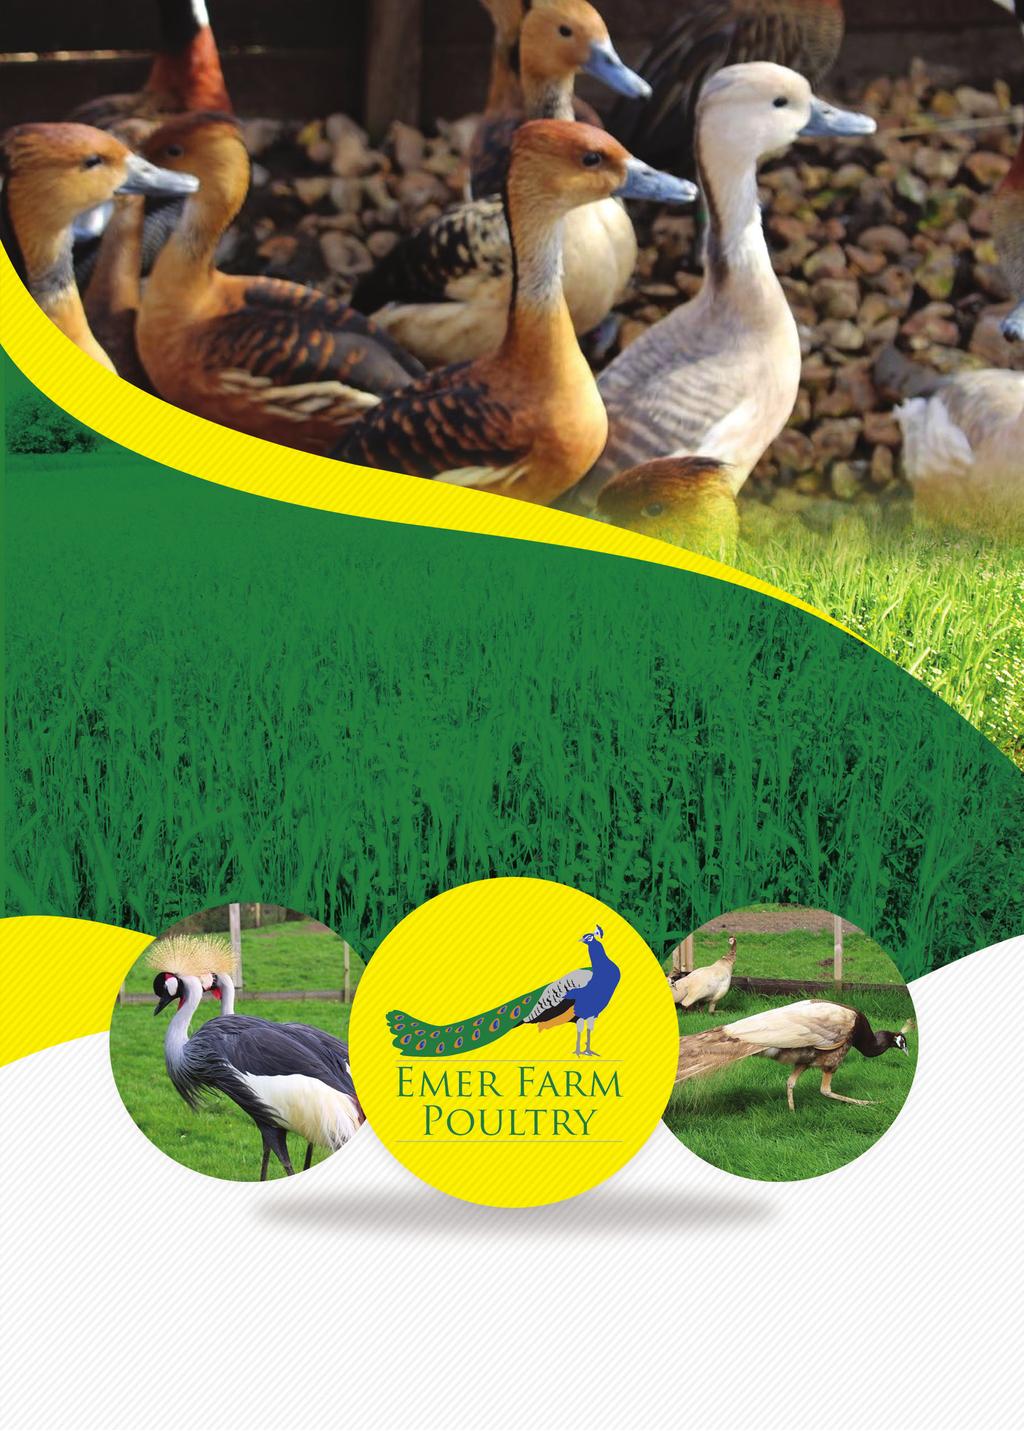 The UK s leading supplier of domestic and ornamental livestock. Emer Farm offer a large selection of Domestic, commercial and ornamental birds and animals.